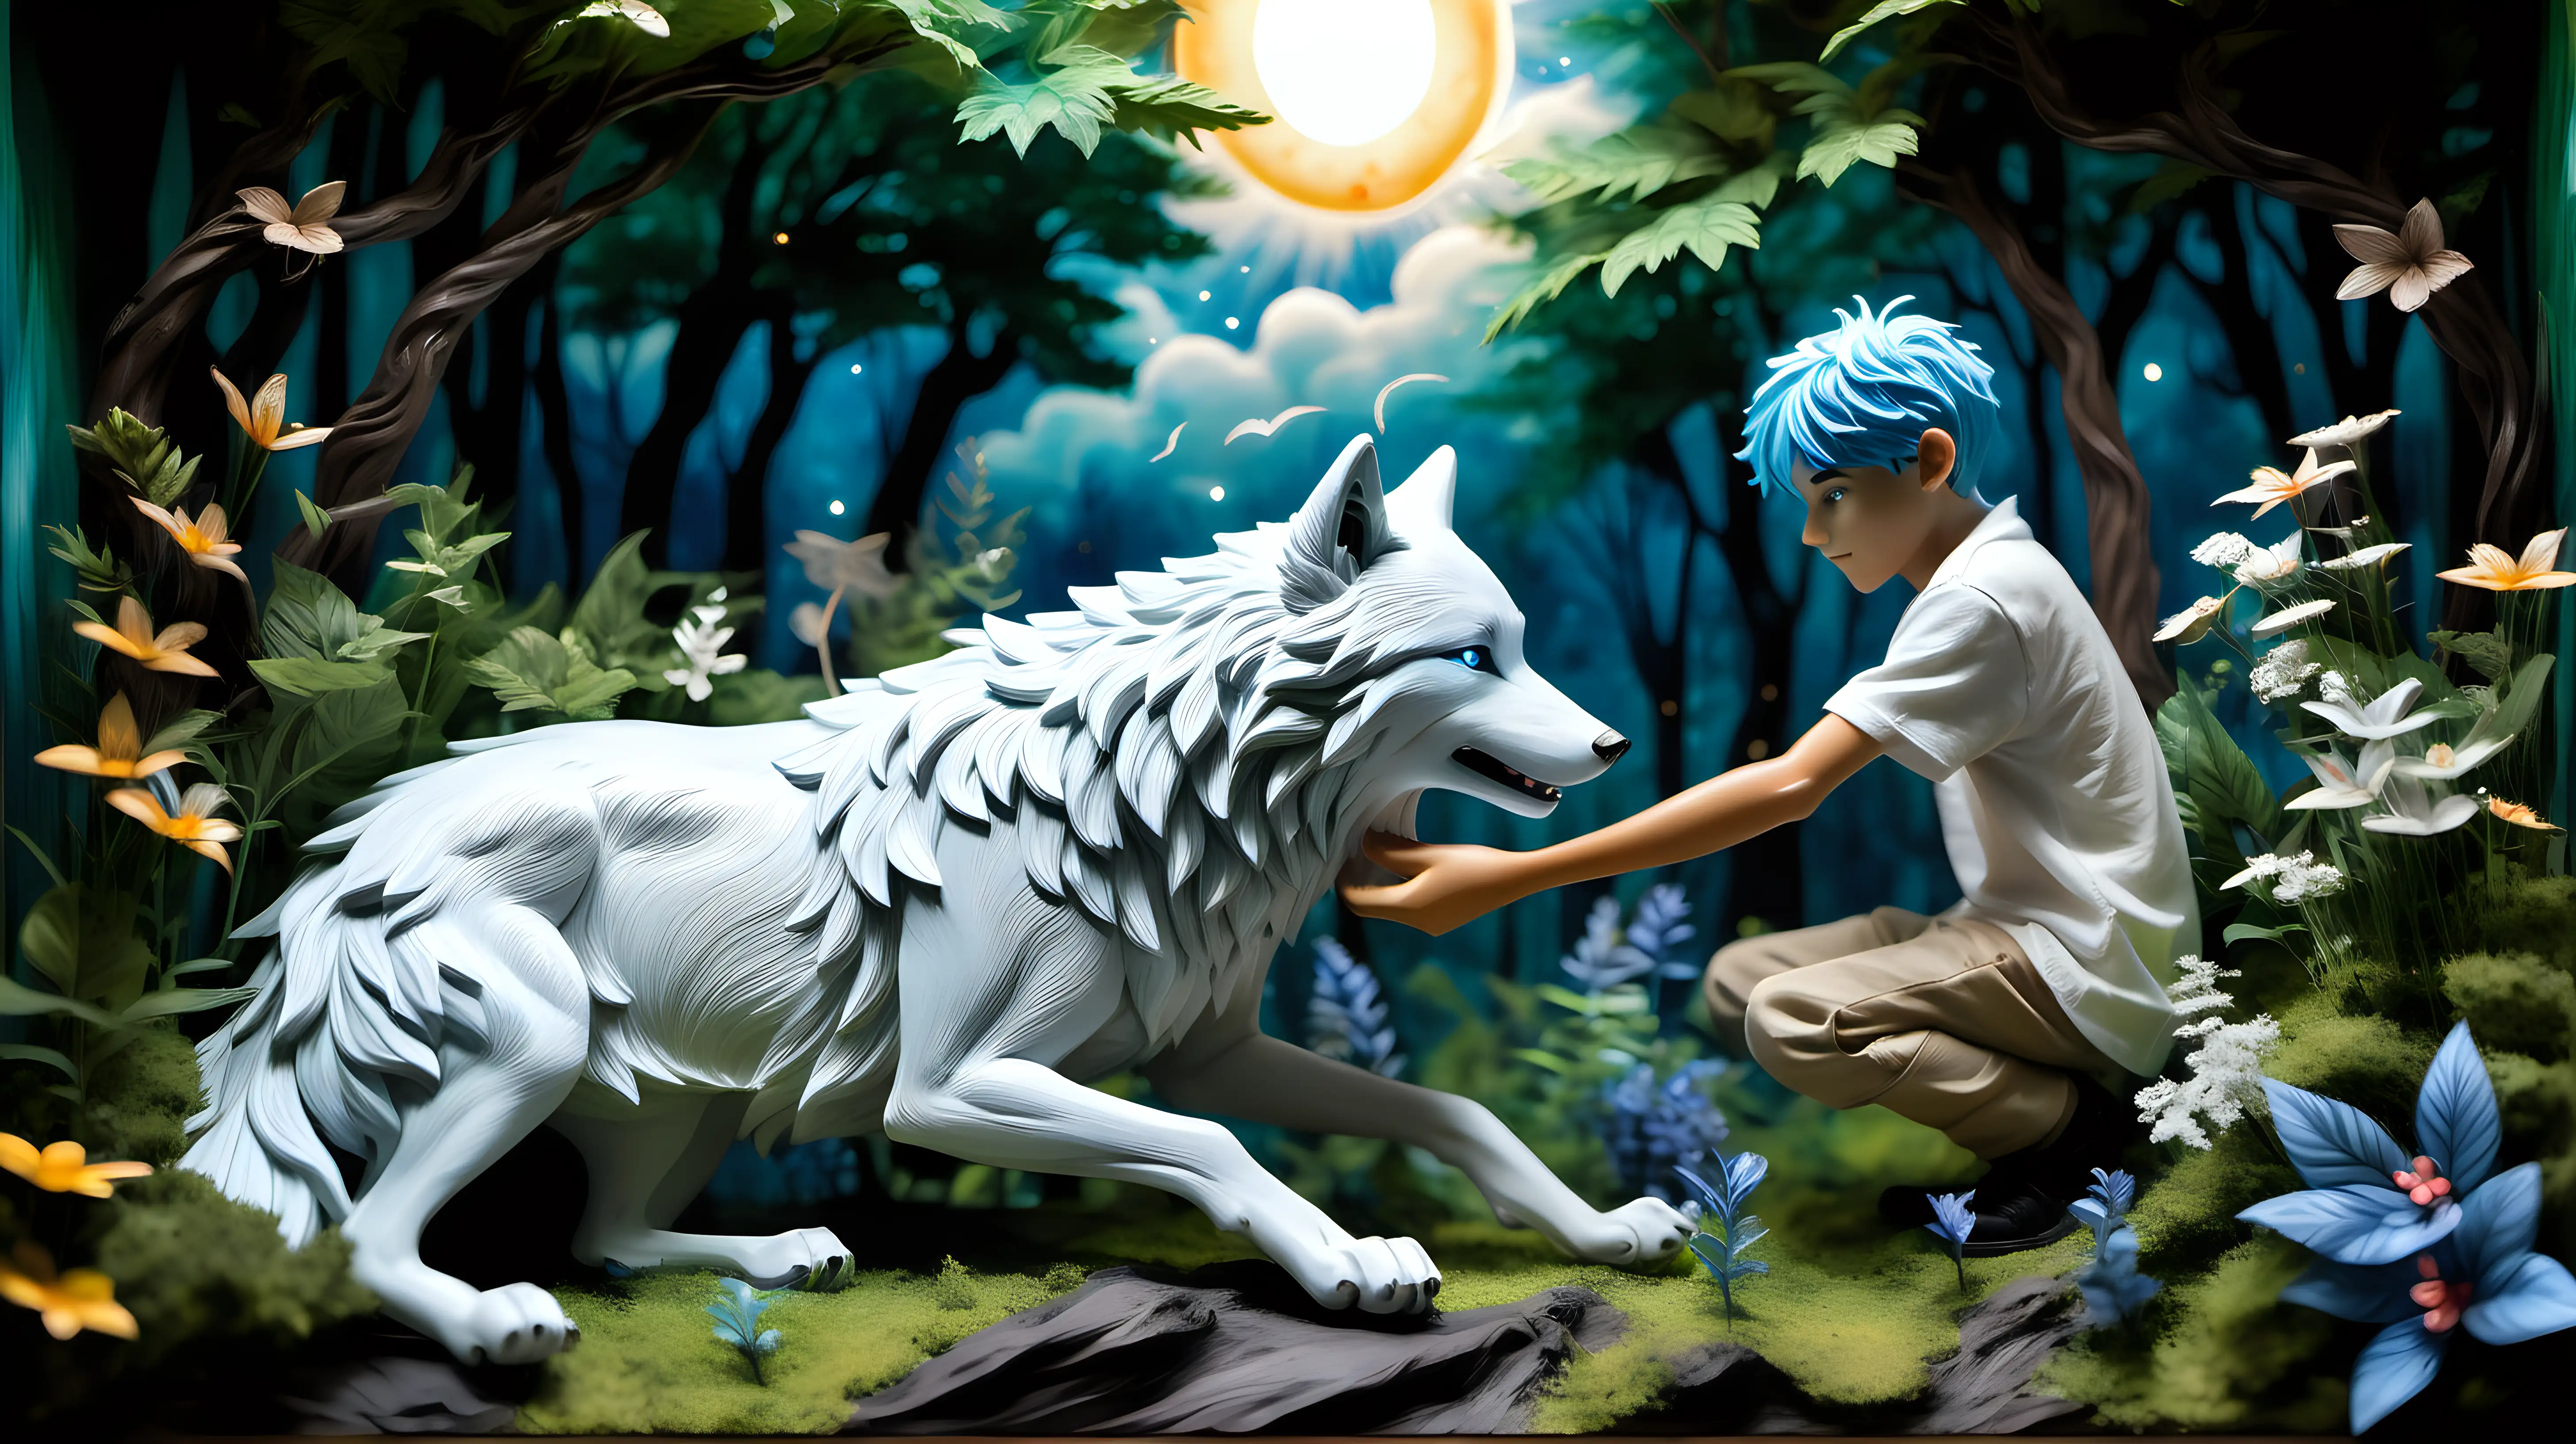 Enchanting Ghibli Inspired Painting BlueHaired Boy and White Wolf in Magical Forest